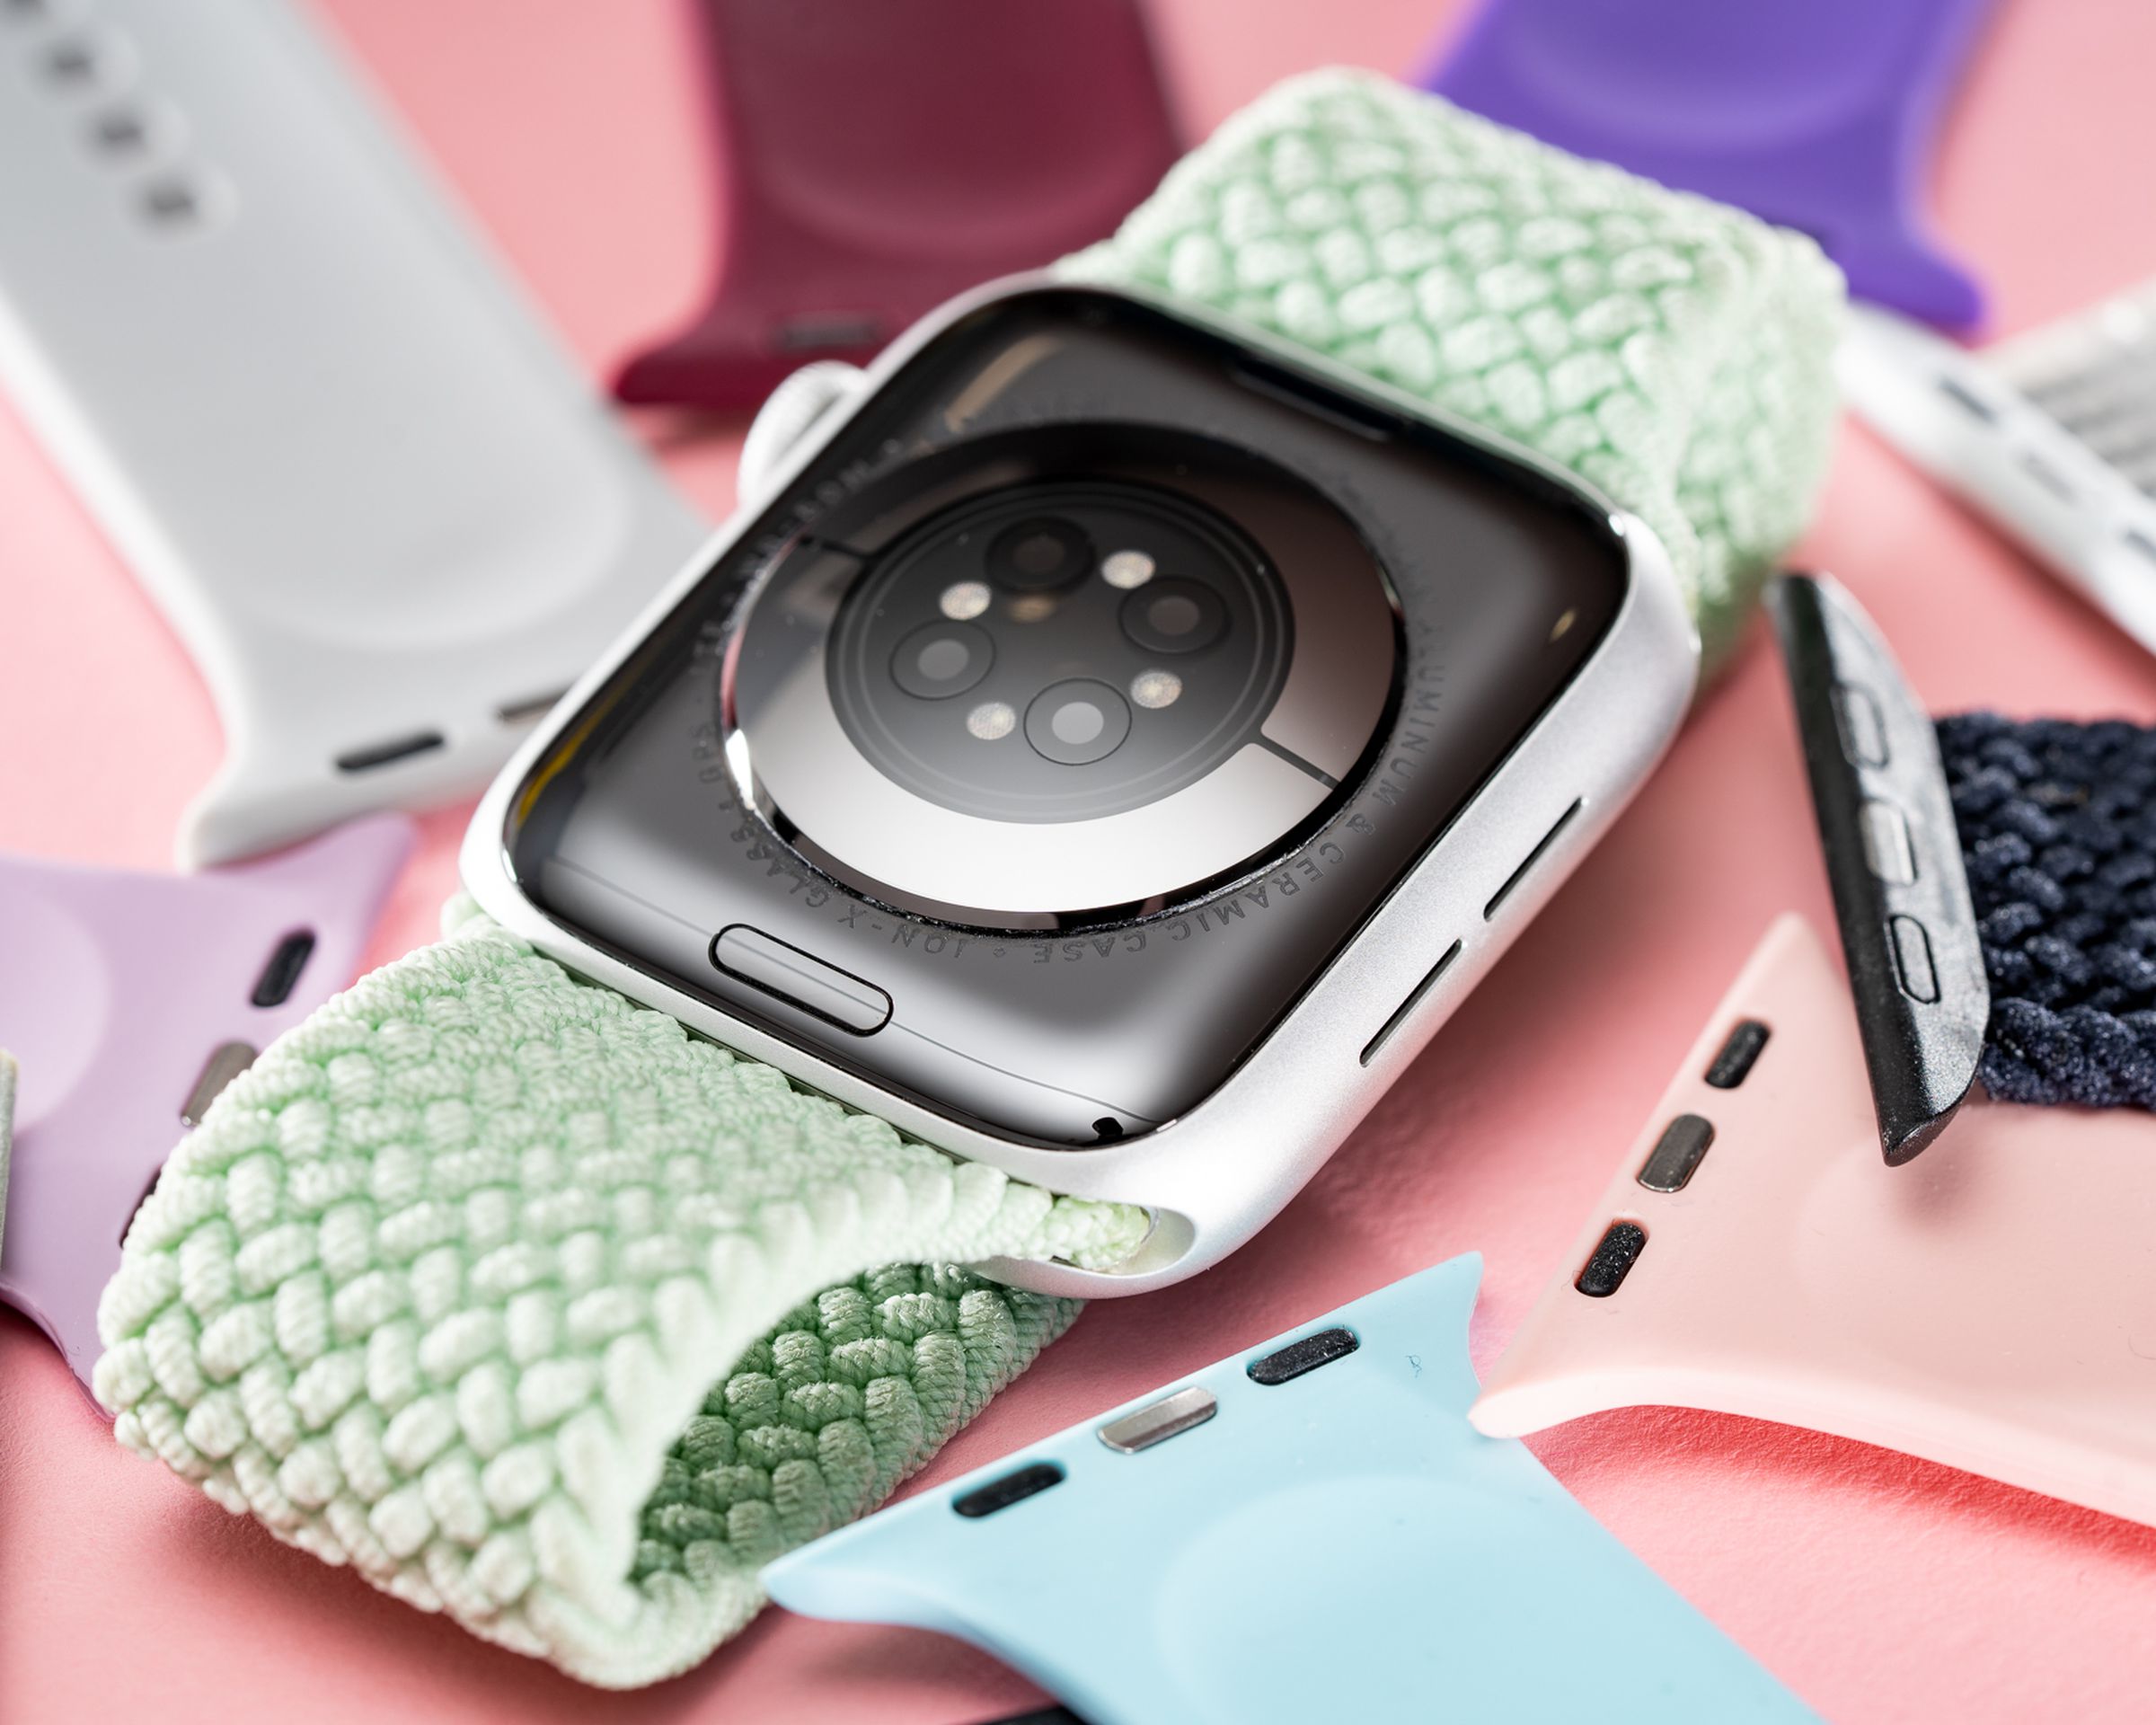 An upturned Apple Watch surrounded by spare straps, with its hidden band release button displayed prominently.